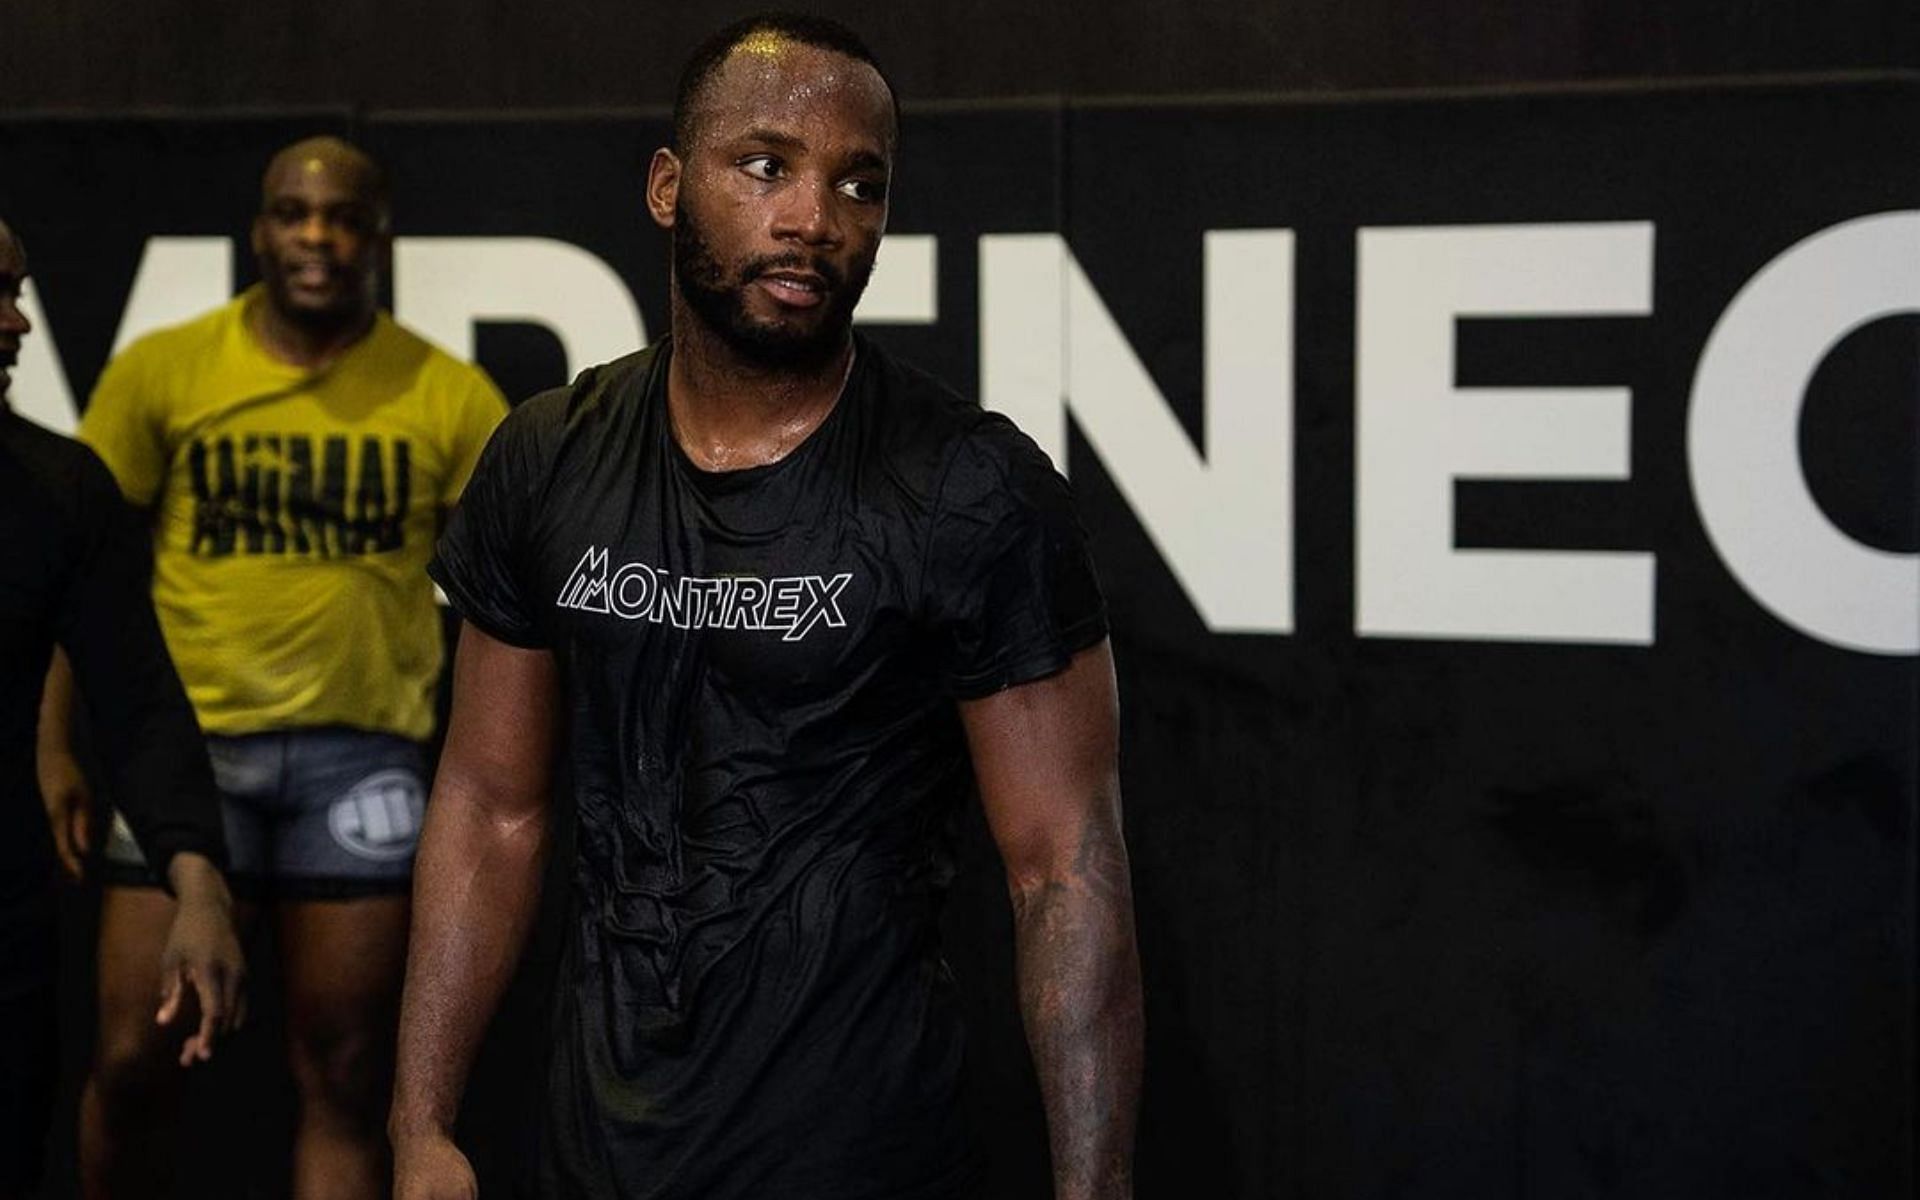 How many losses does UFC welterweight champion Leon Edwards have?